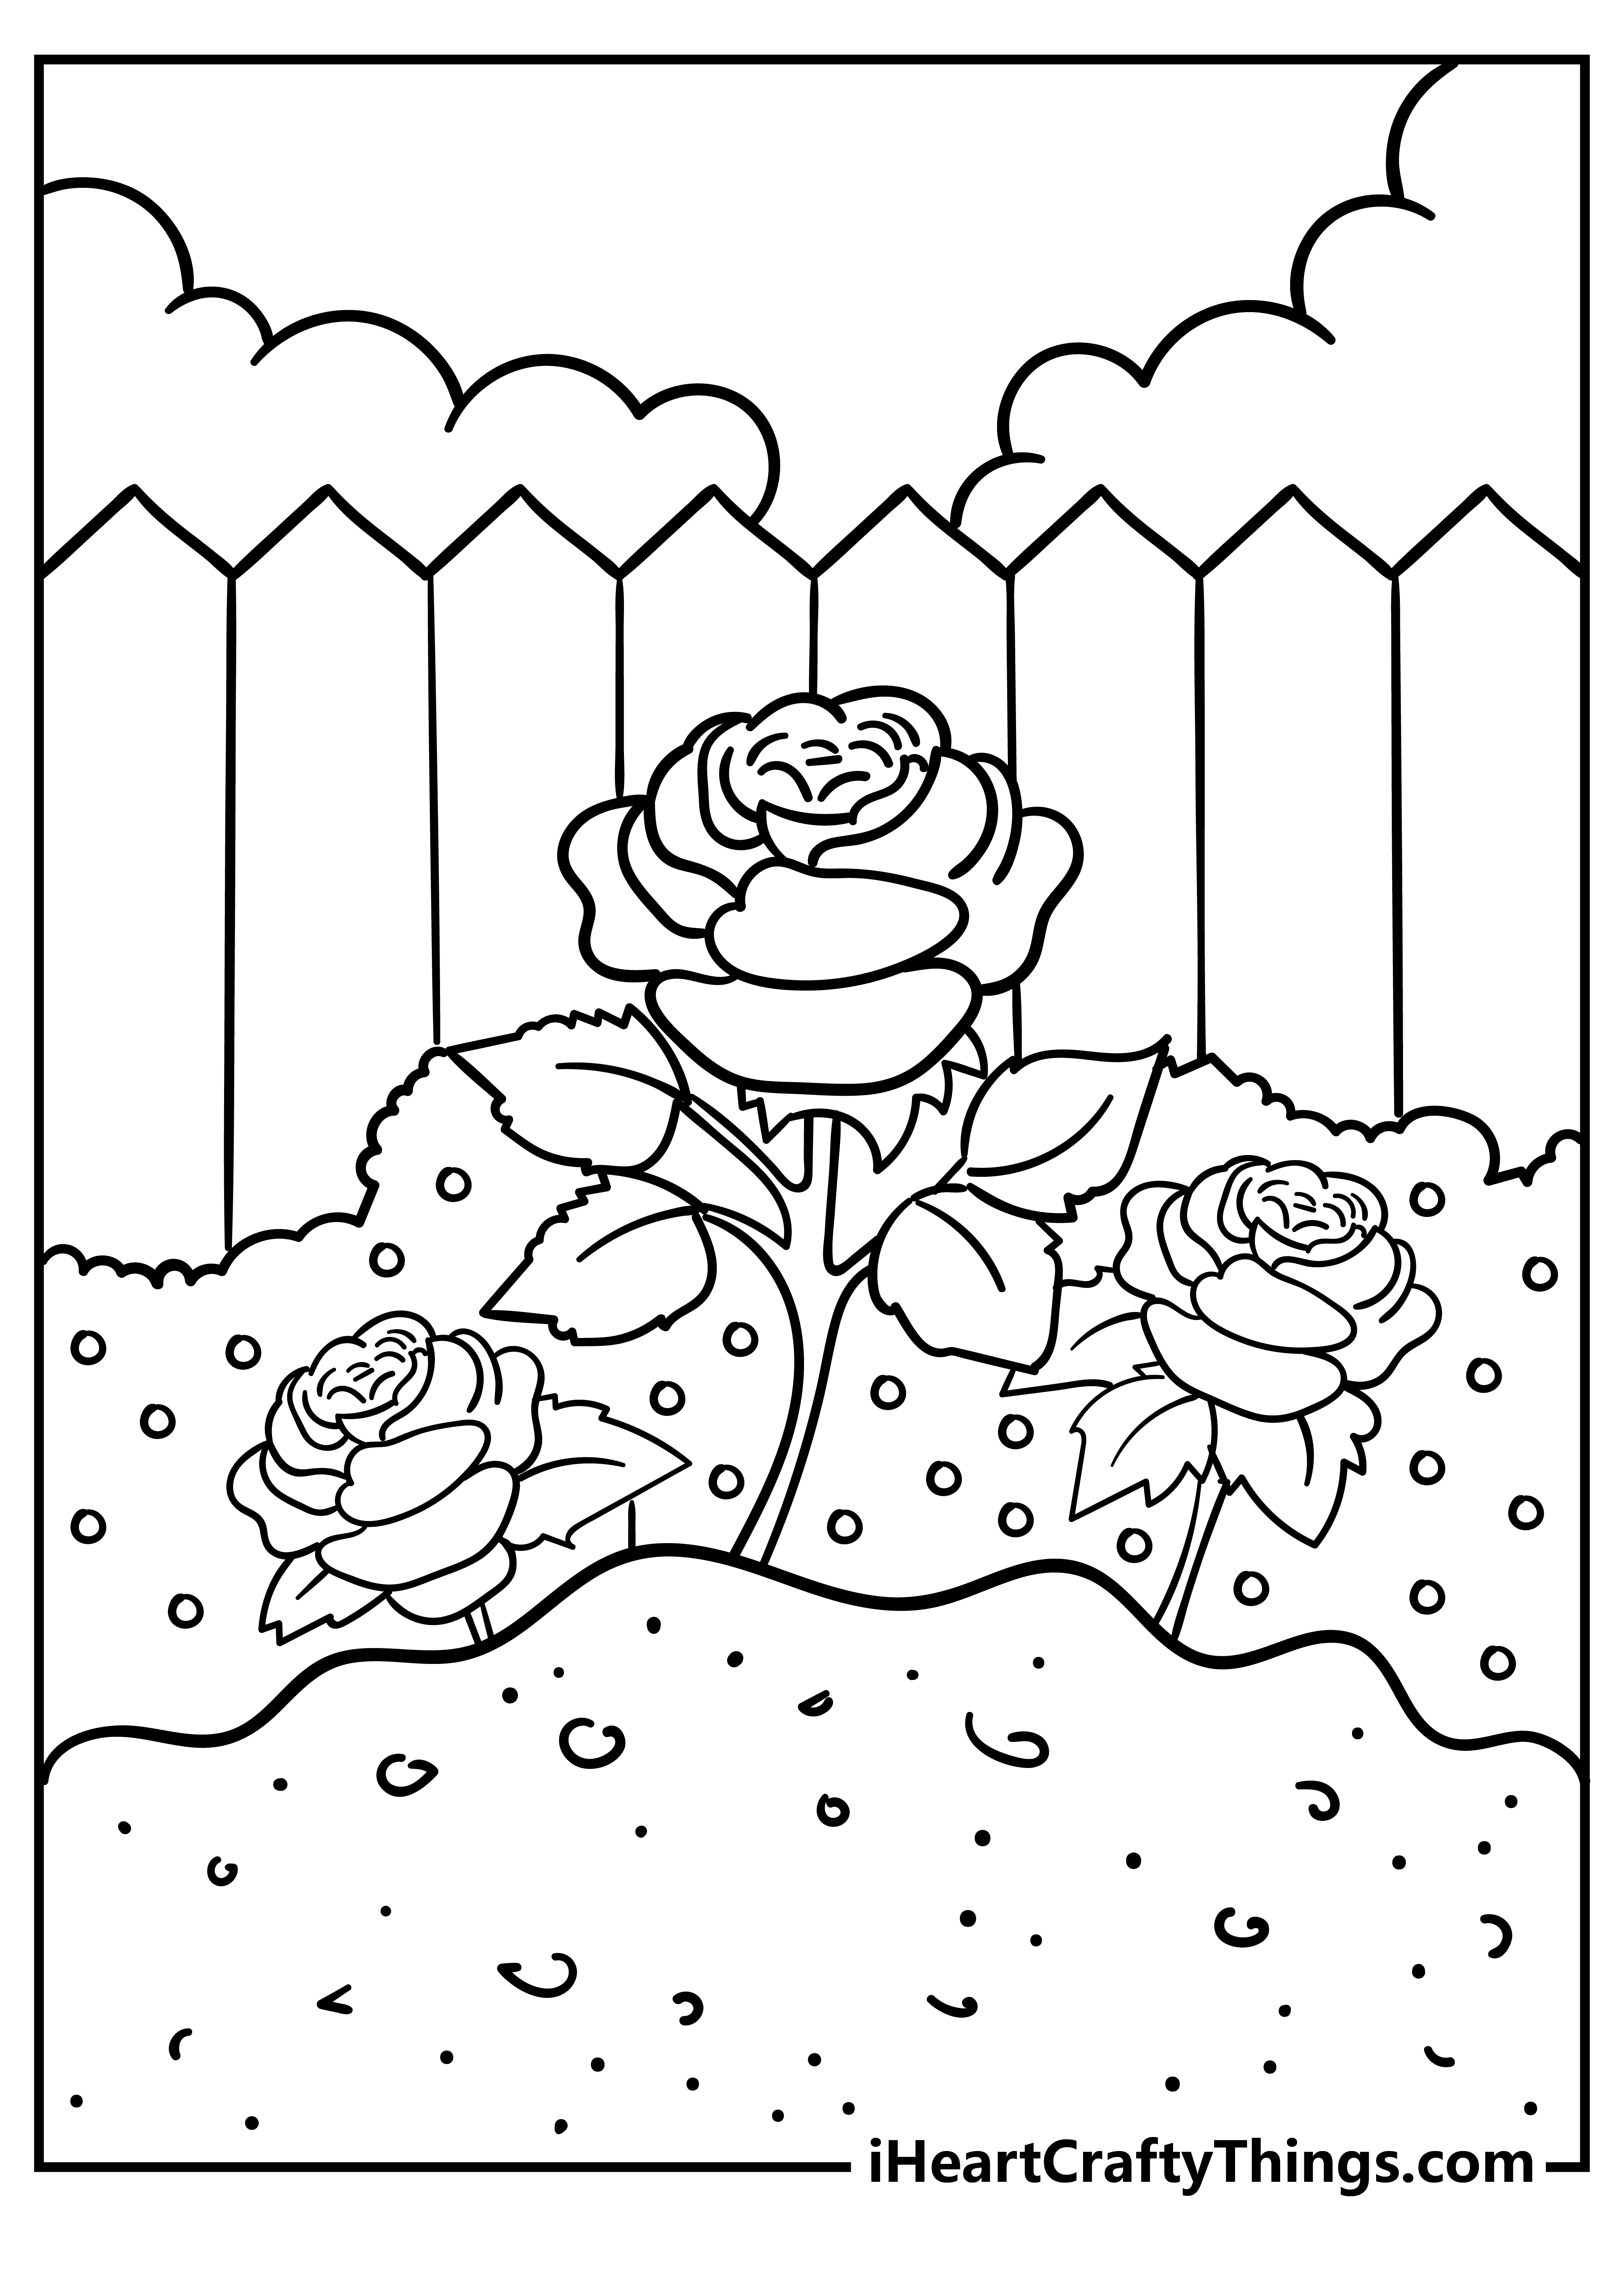 Garden Coloring Pages for adults free printable